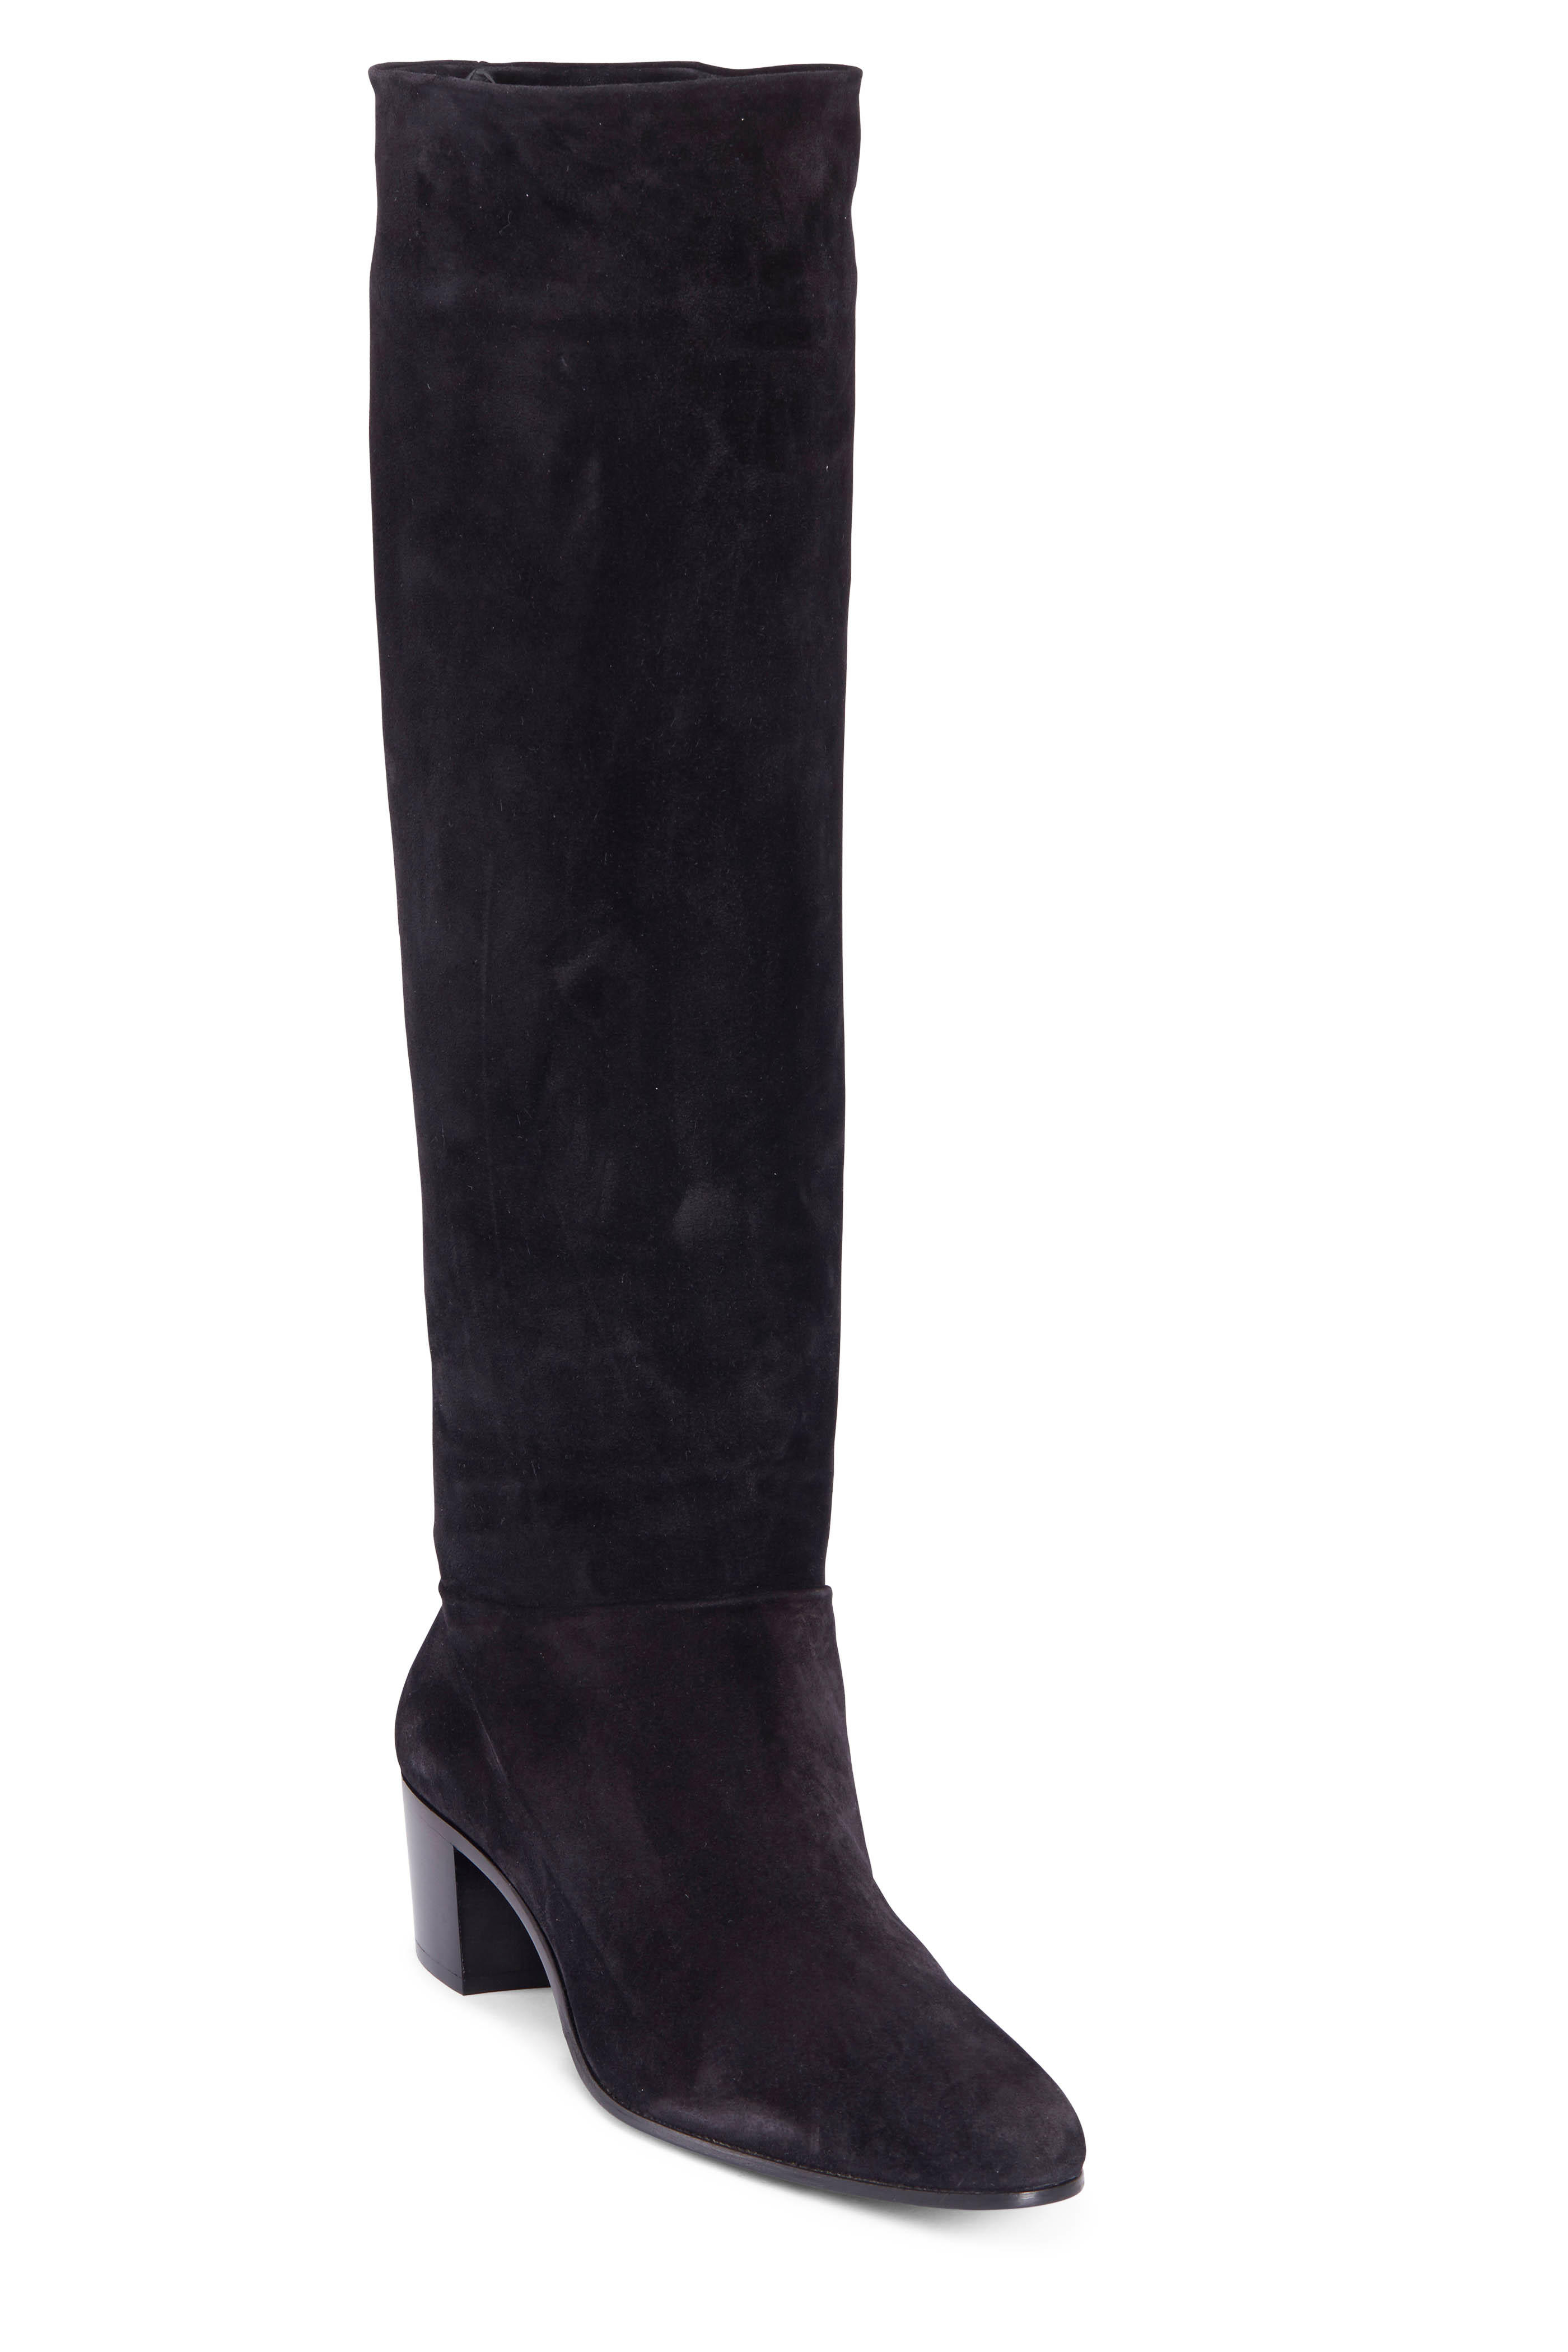 Prada - Calzature Donna Black Suede Slouchy Boot, 45MM | Mitchell Stores